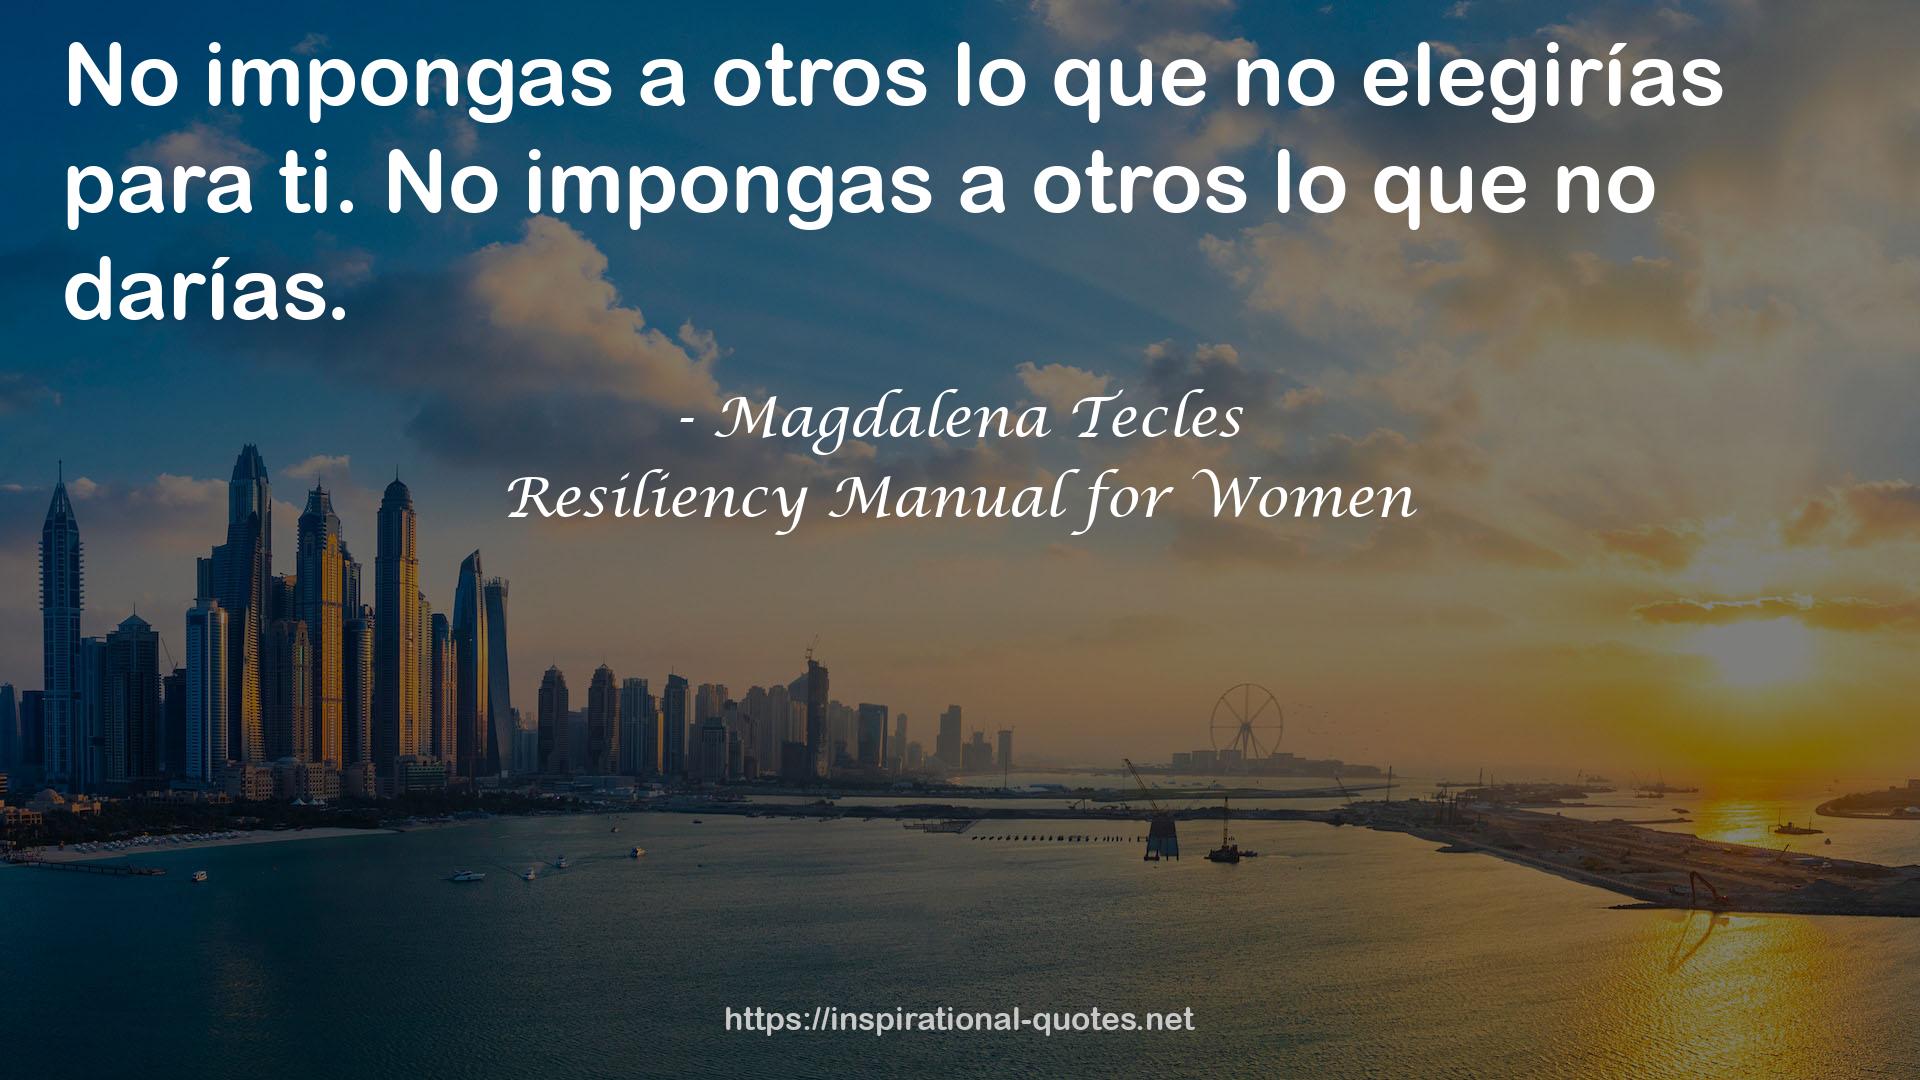 Resiliency Manual for Women QUOTES